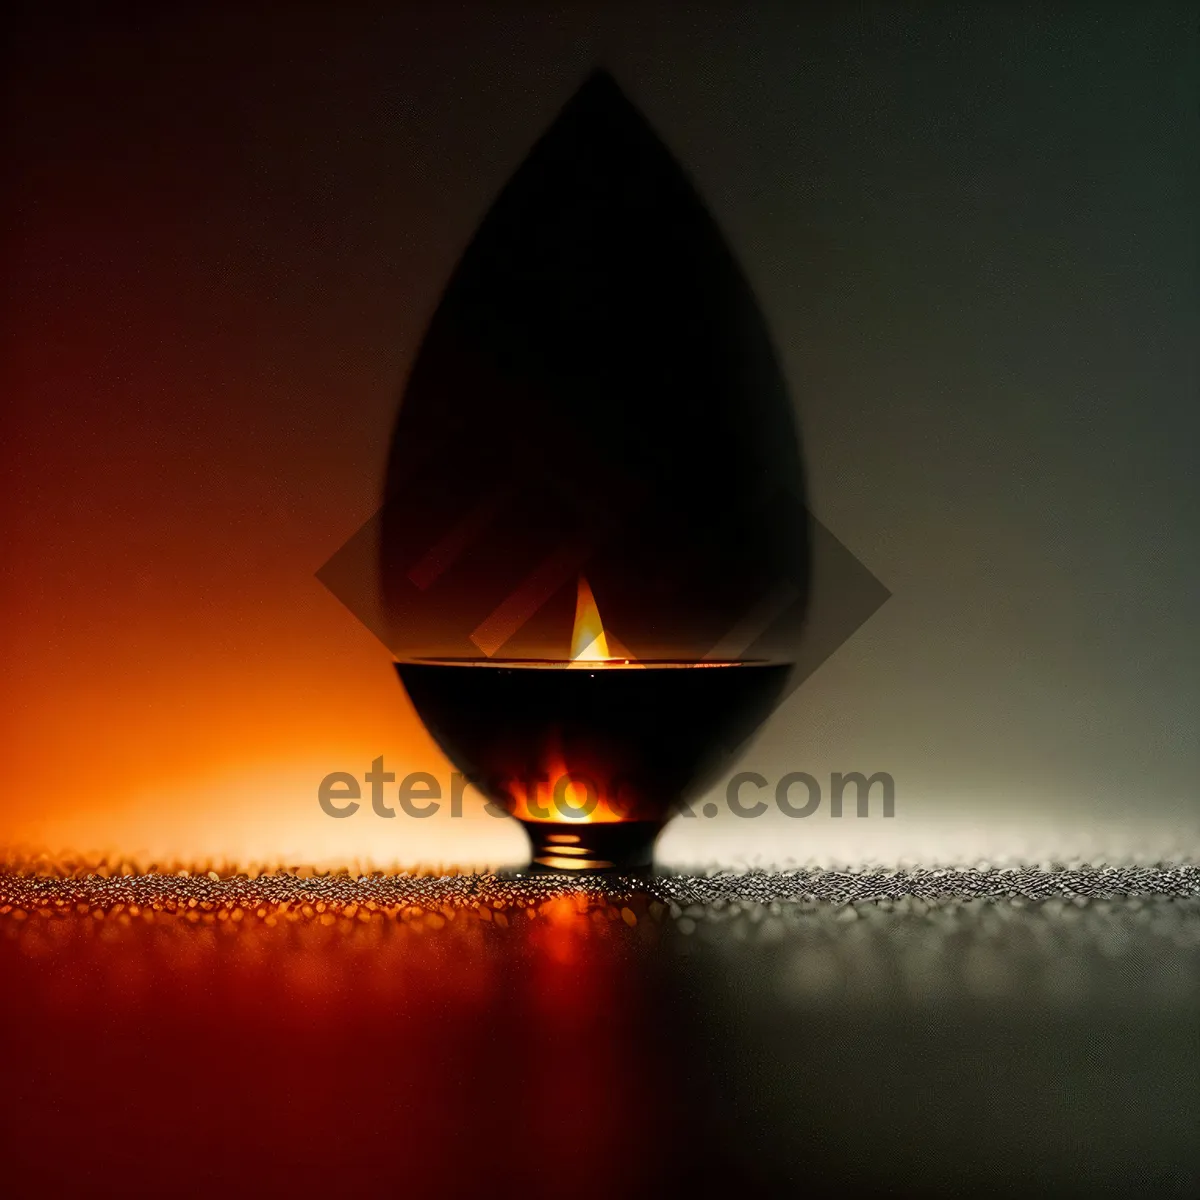 Picture of Sparkling Celebration: Wineglass, Fire, and Champagne